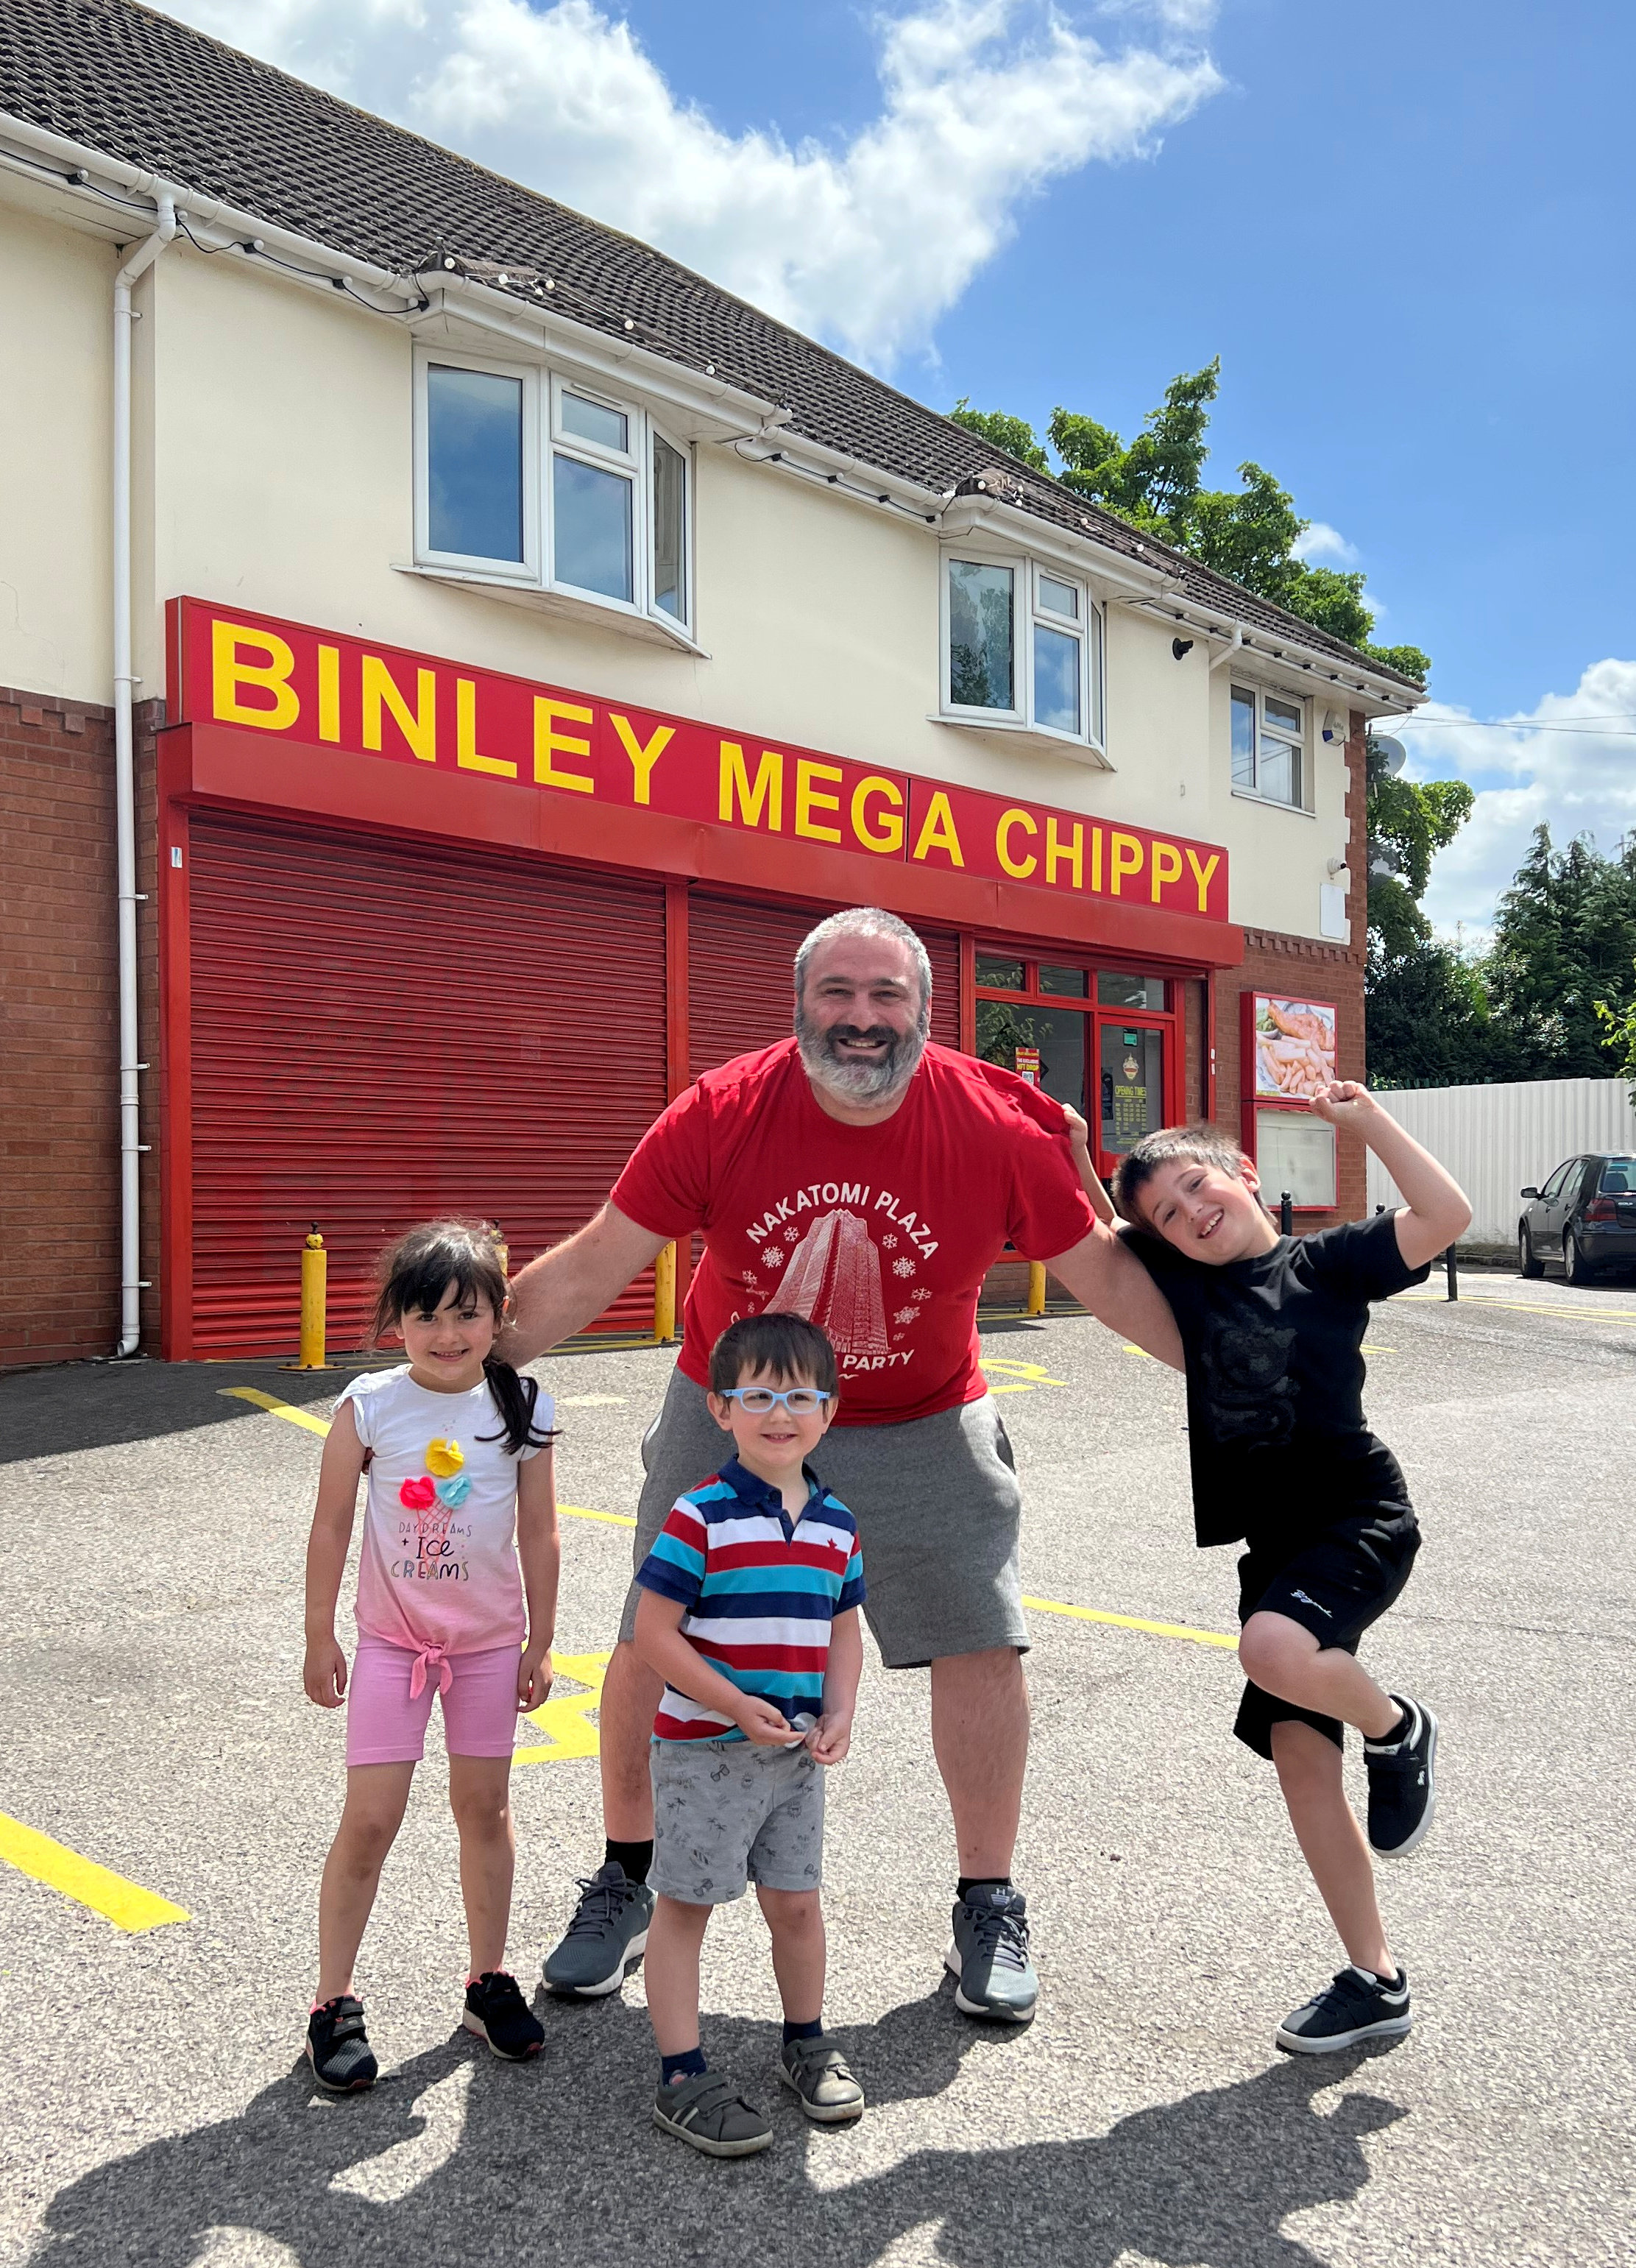 Dad Drives More Than 100 Miles To Take Kids To Binley Mega Chippy Only To Realise It's Closed